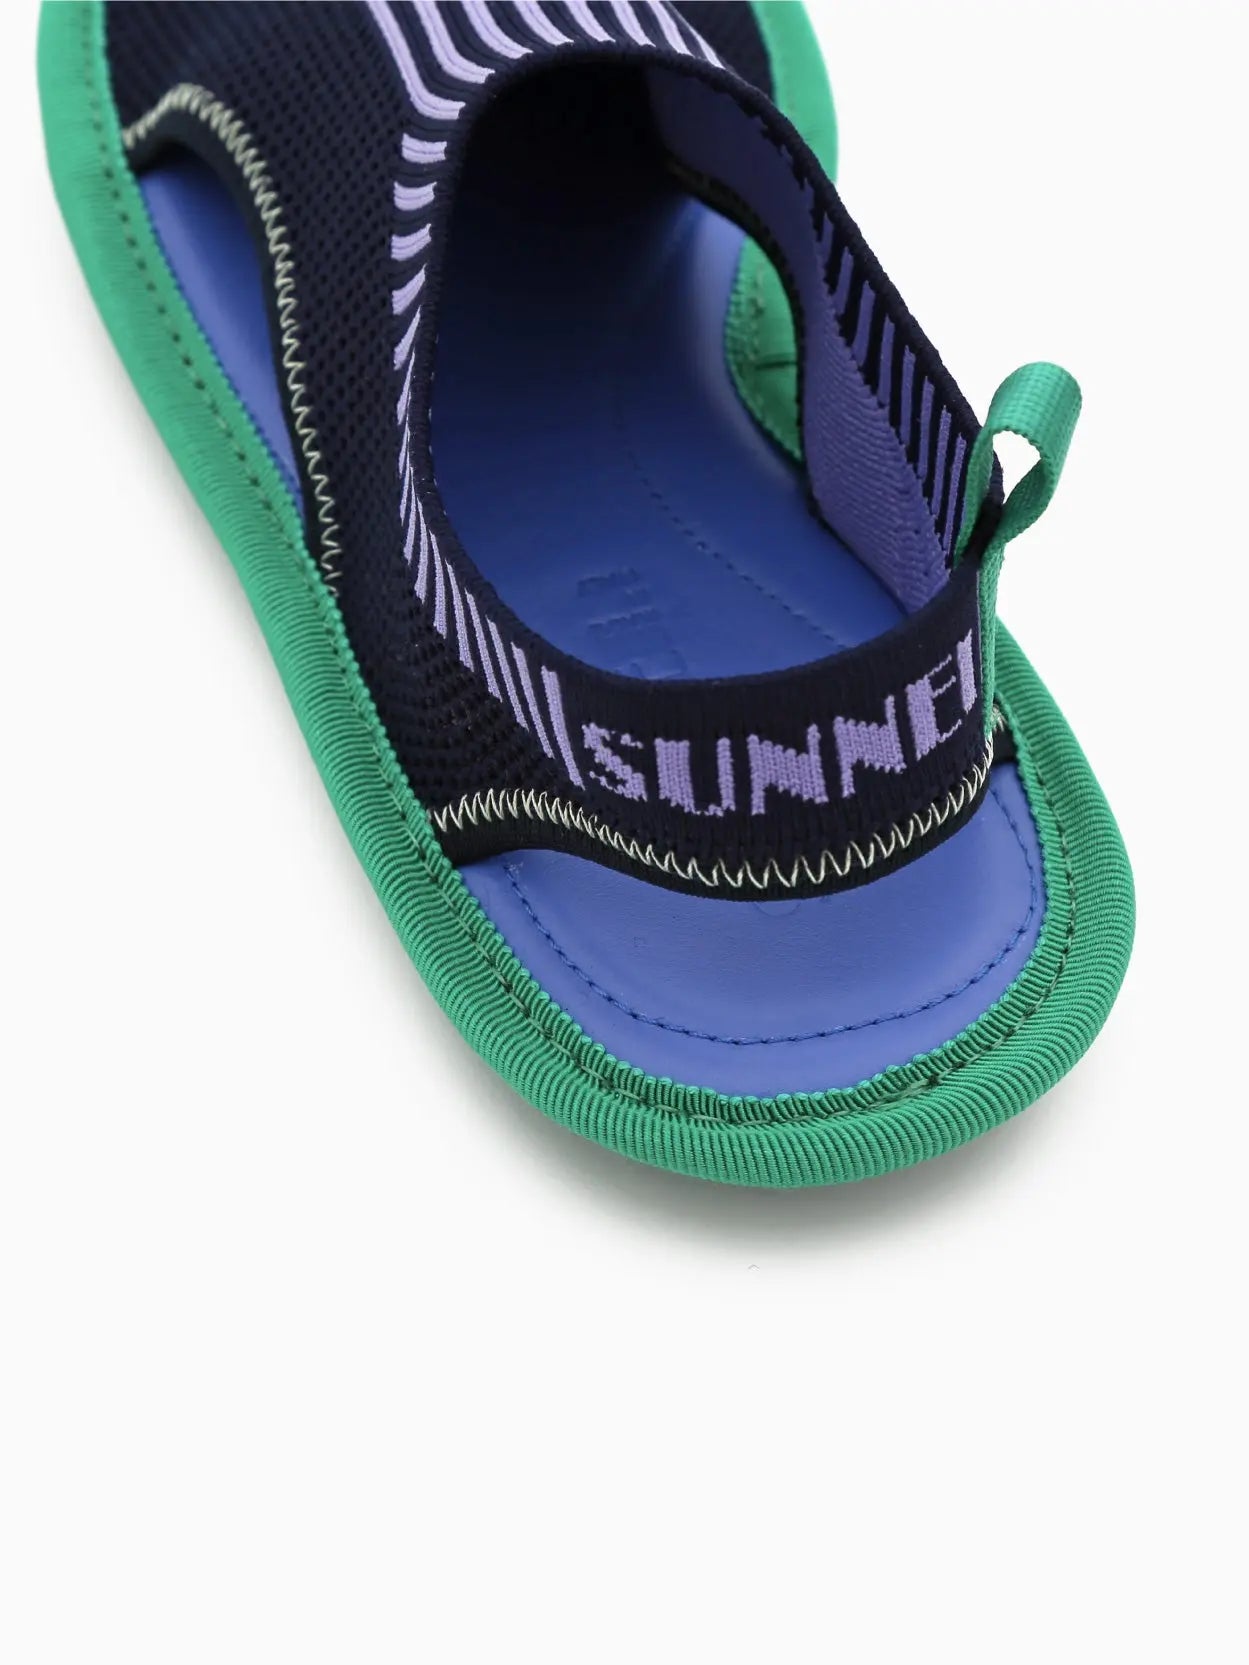 A single blue and green slip-on athletic shoe with a sock-like upper design and a flexible sole featuring prominent tread. The shoe displays cut-out details on the sides and a small loop at the heel for easy wearing, available exclusively at bassalstore in Barcelona. This is the Chiodi Knit Flat by Sunnei.